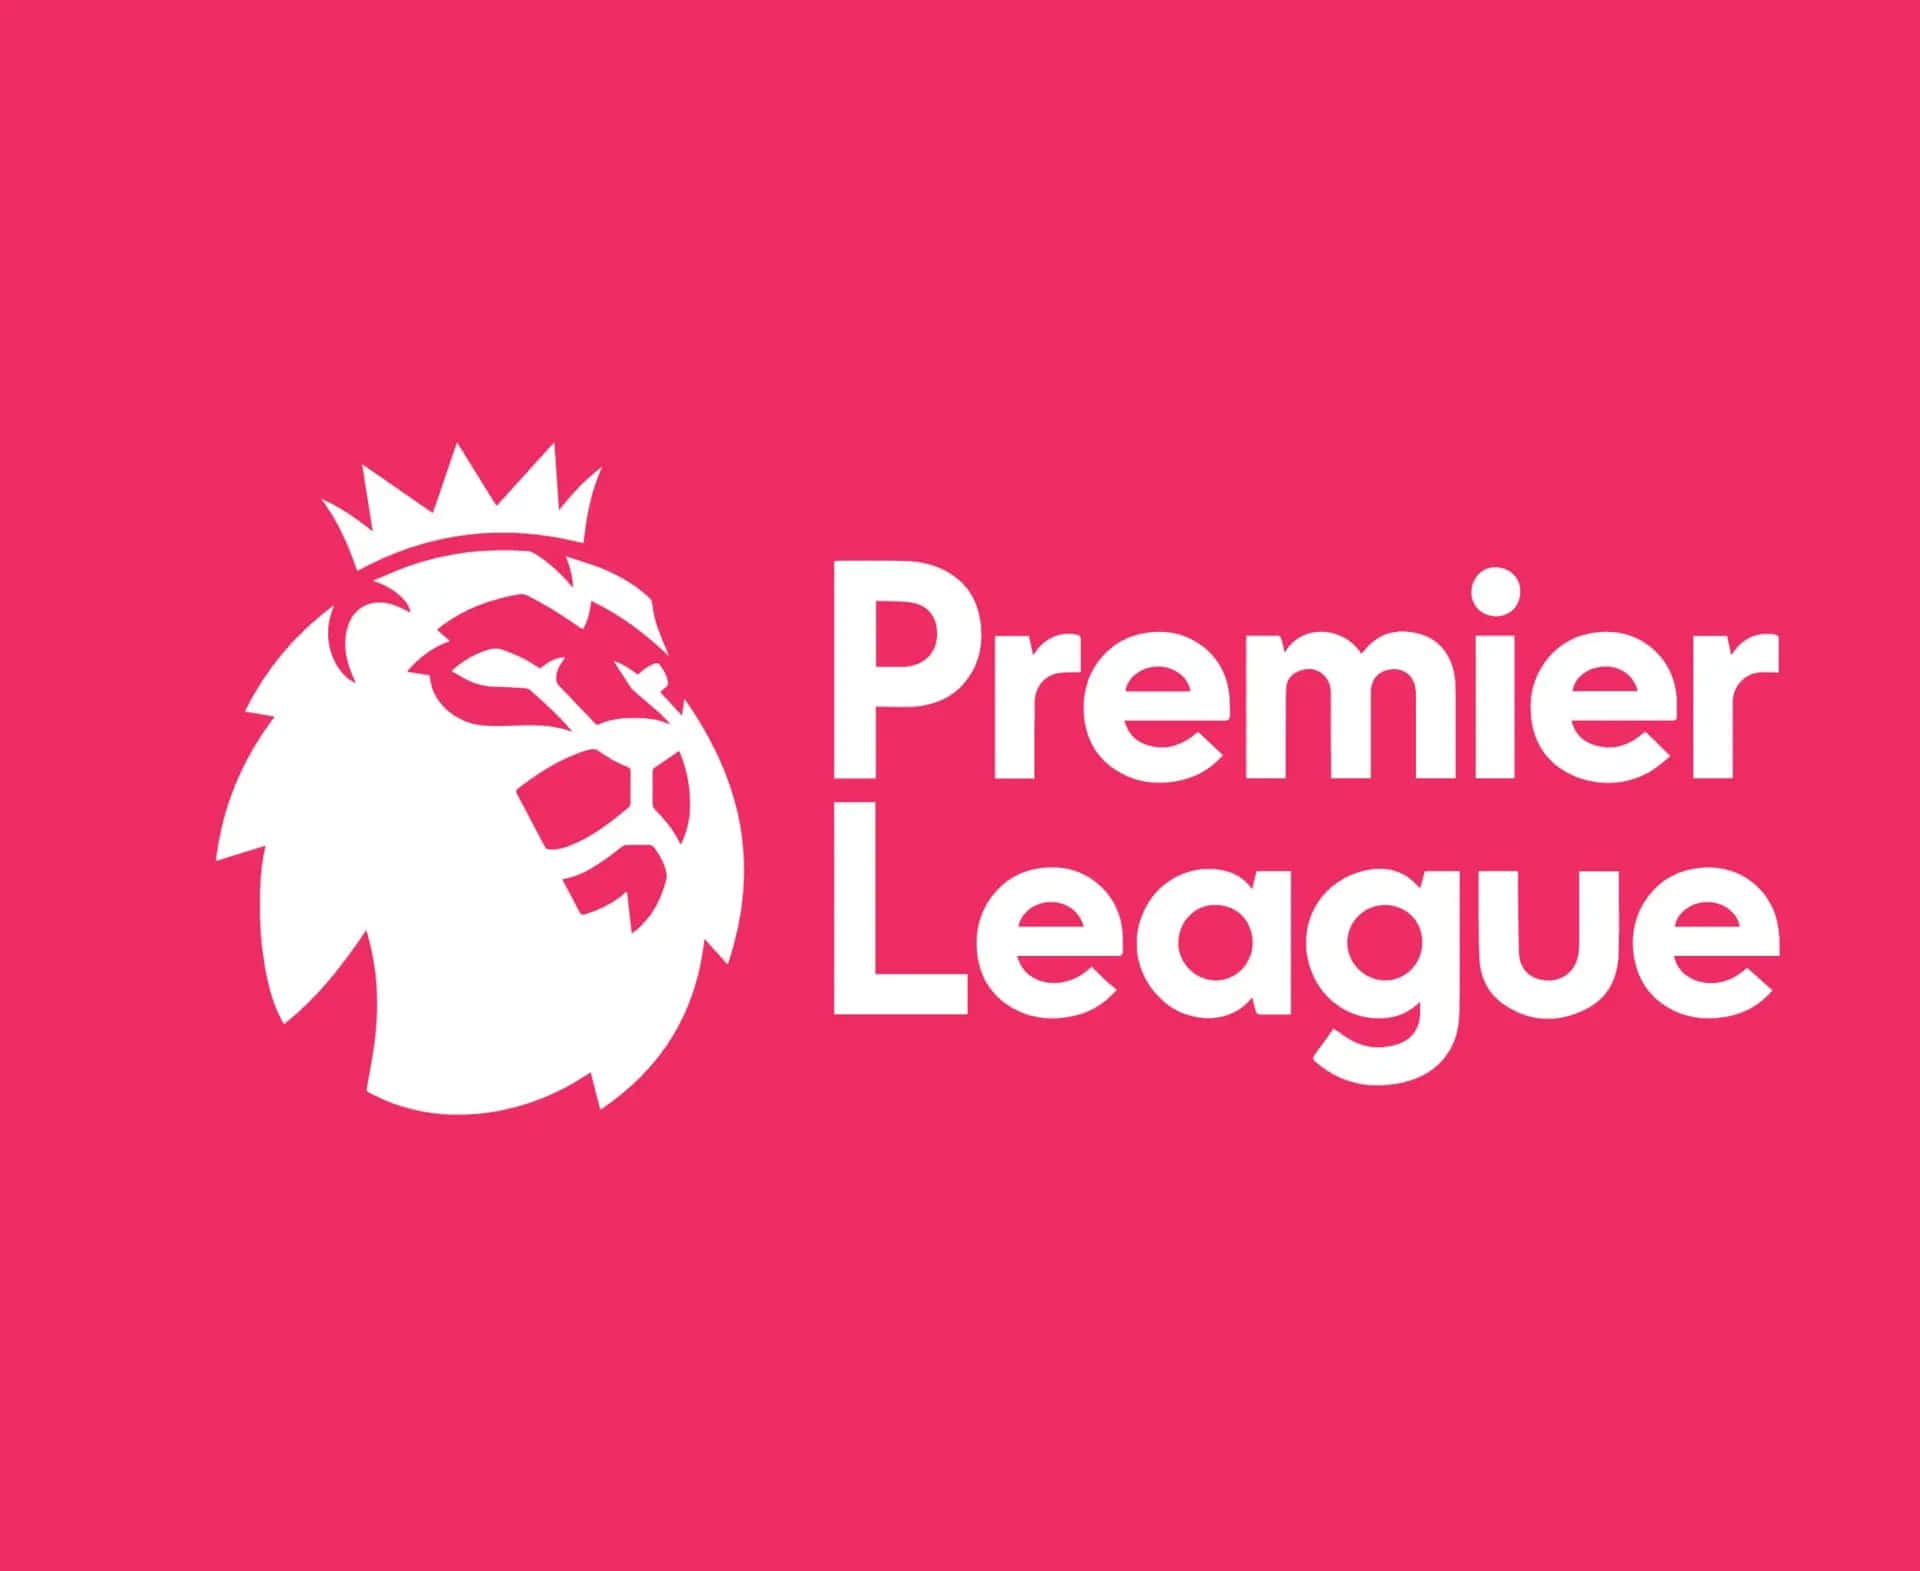 Catch all the action at Premier League Stadiums